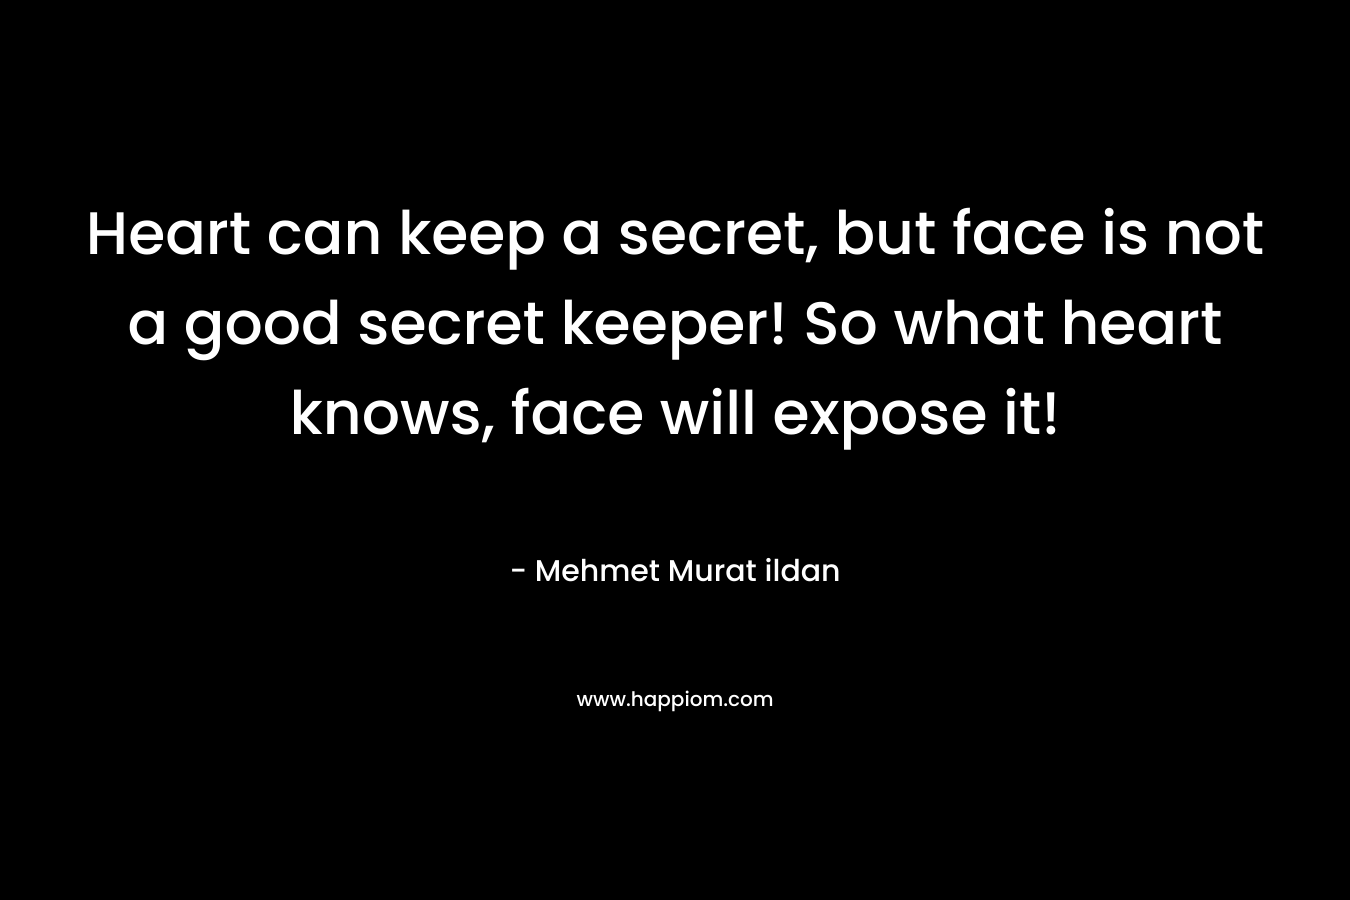 Heart can keep a secret, but face is not a good secret keeper! So what heart knows, face will expose it!